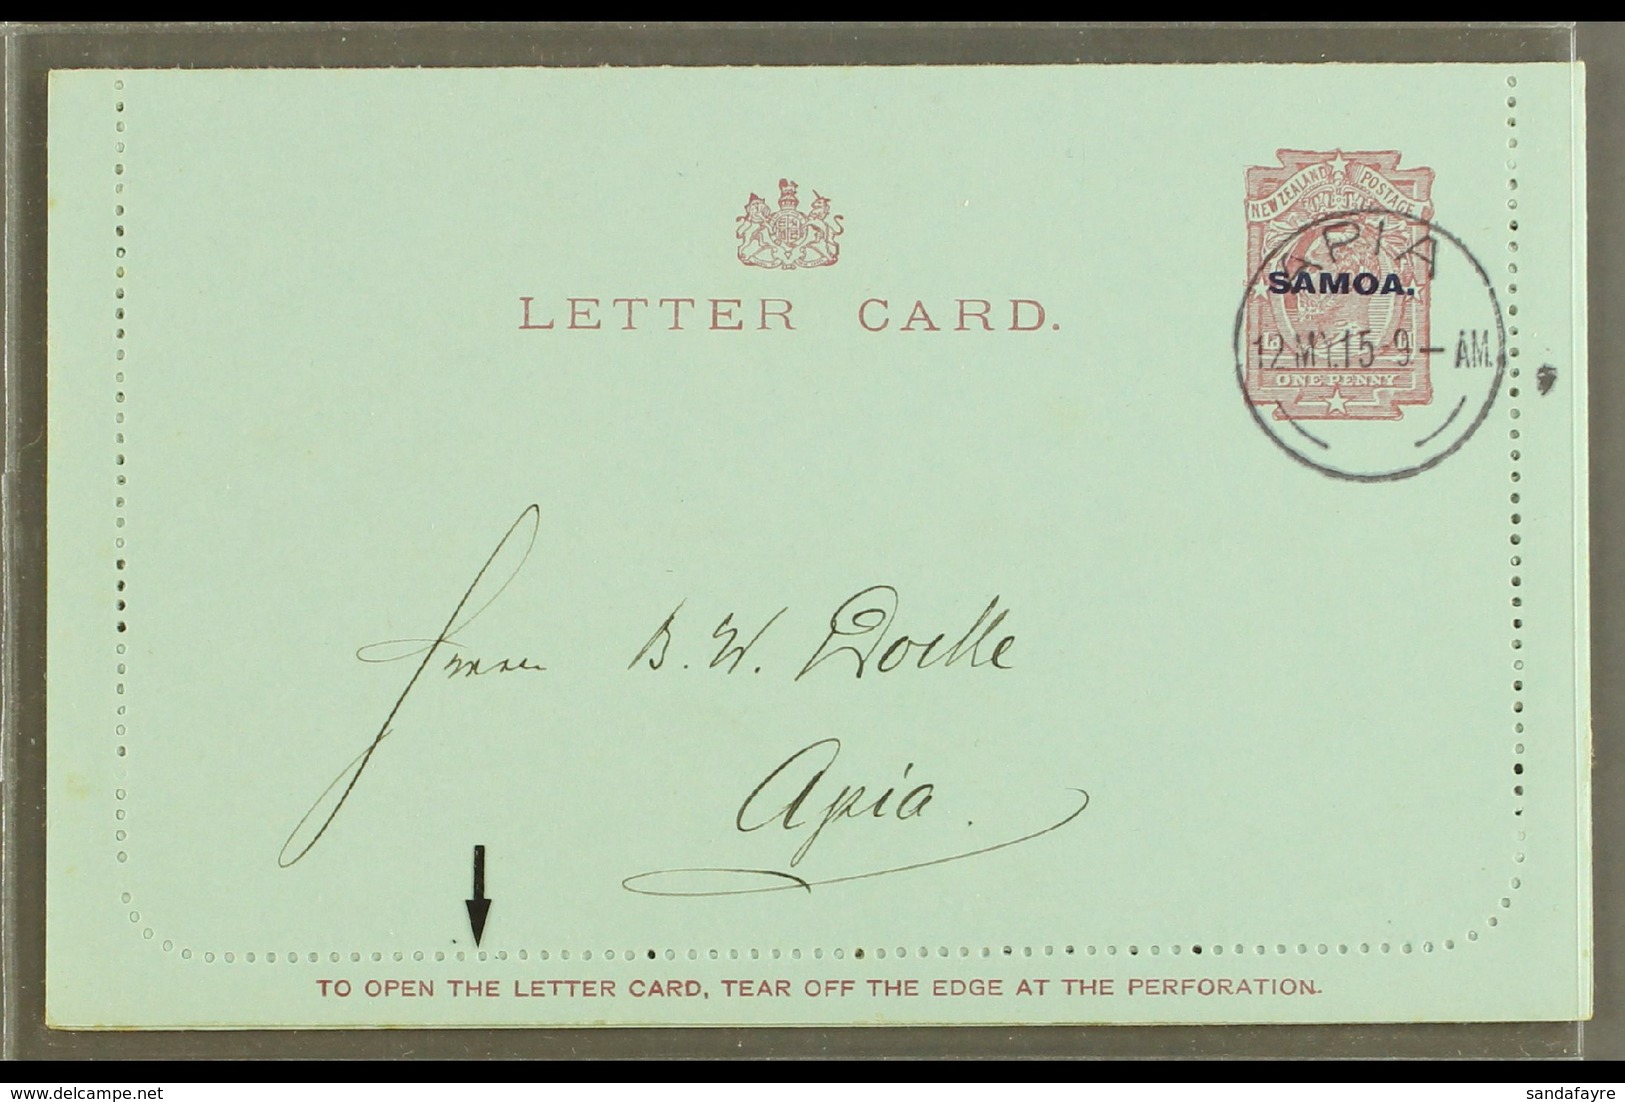 1915 LETTER CARD 1d Dull Claret On Blue, Inscription 94mm, H&G 1a, Posted Locally, Apia 12.05.15, Clean & Fine With Bind - Samoa